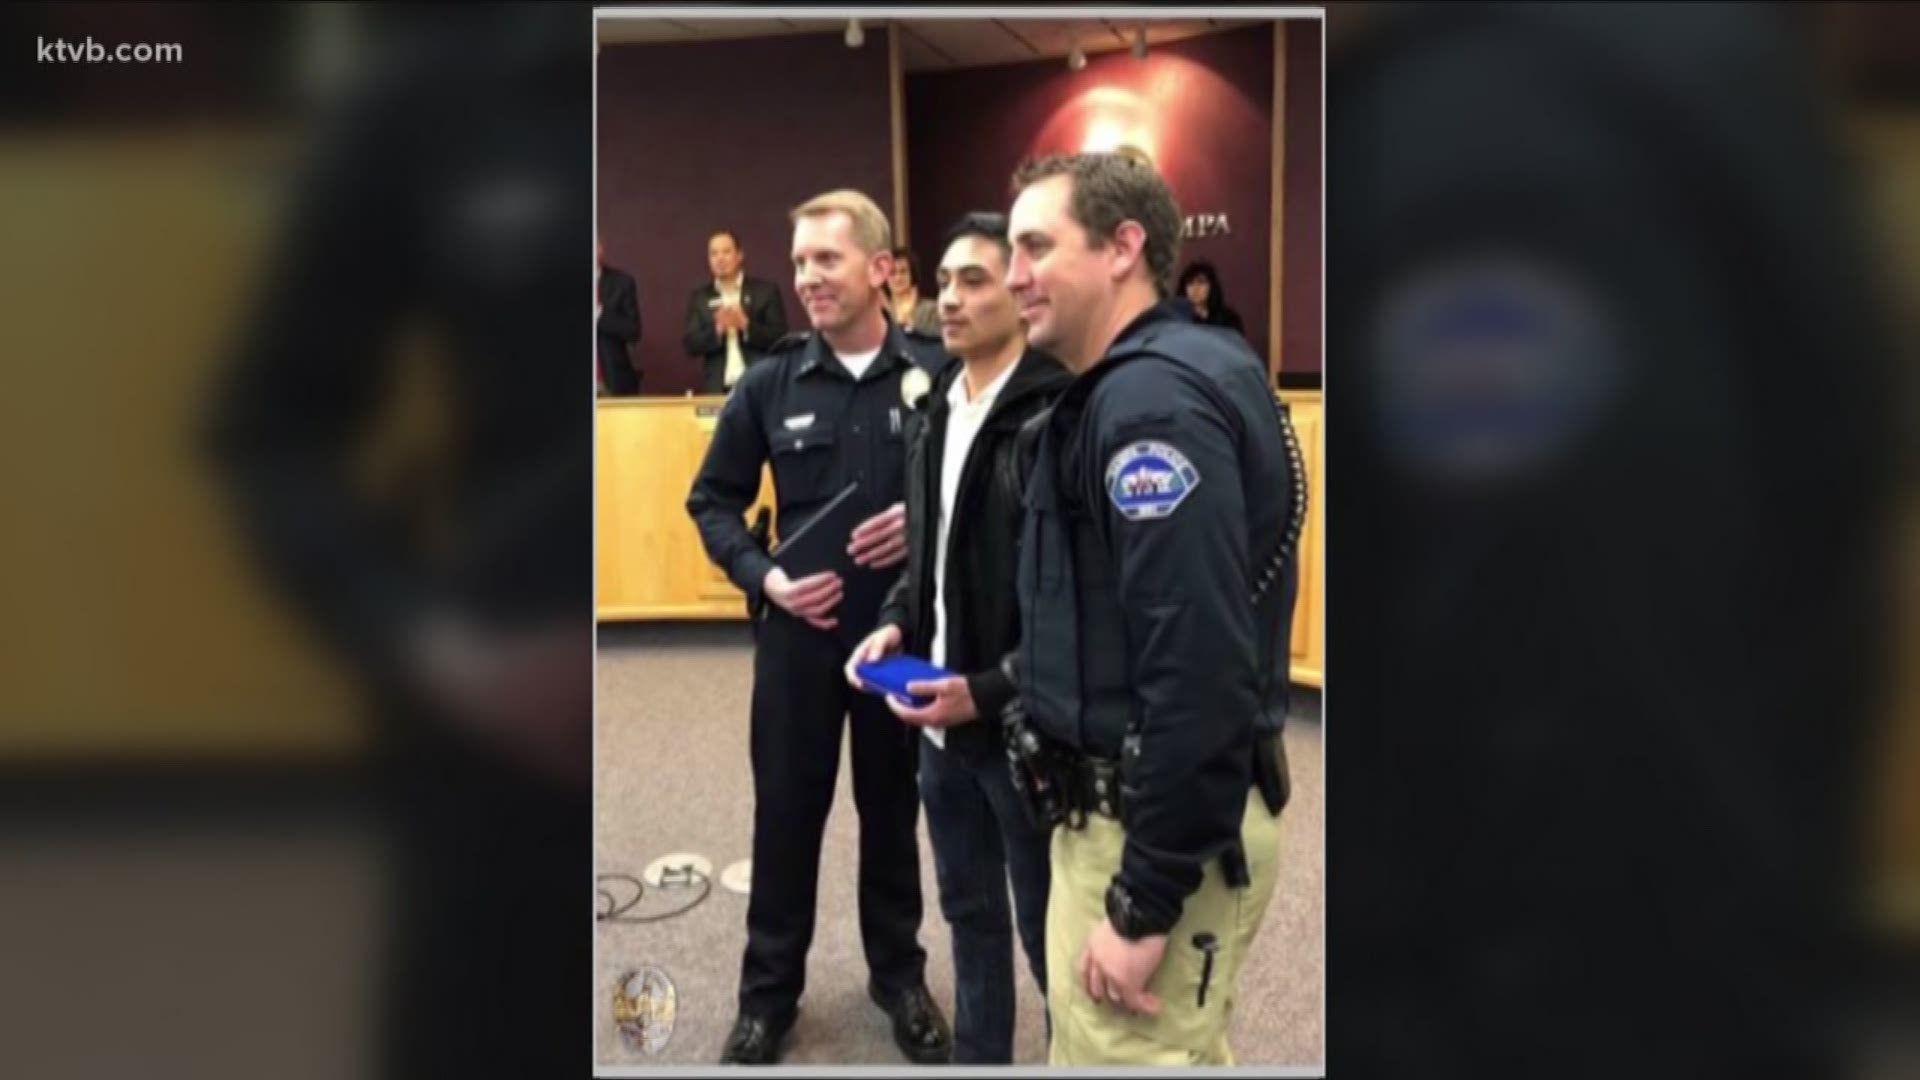 A Nampa high school student who stepped in to stop a knife attack on a fellow student says he was just in the right place at the right time. Now he's being recognized as a hero.